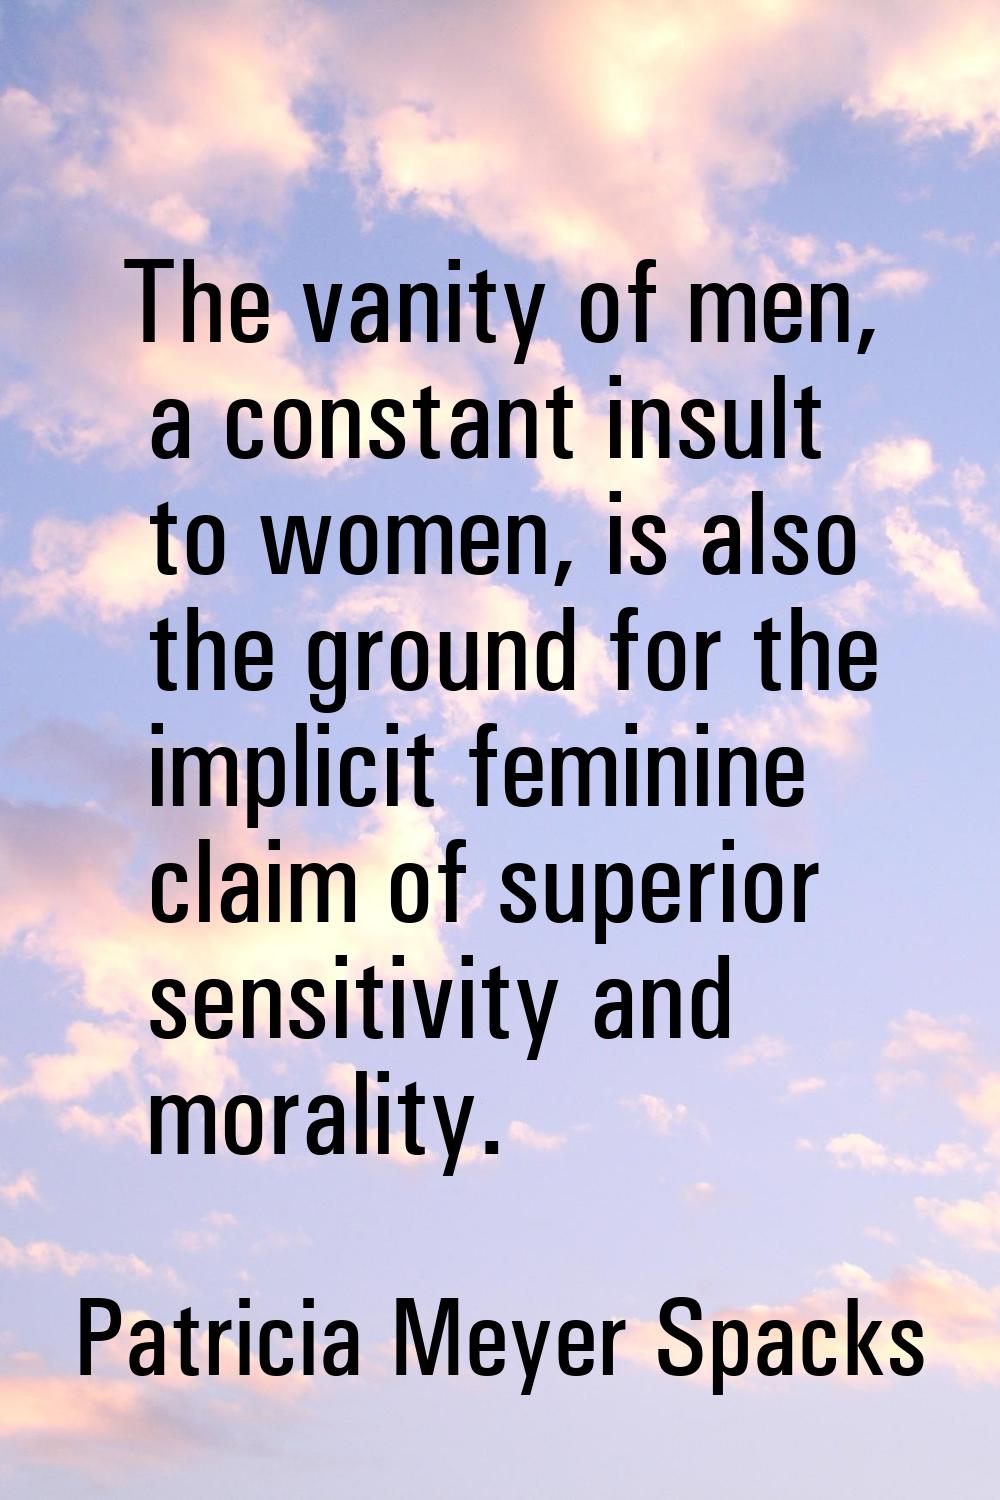 The vanity of men, a constant insult to women, is also the ground for the implicit feminine claim o